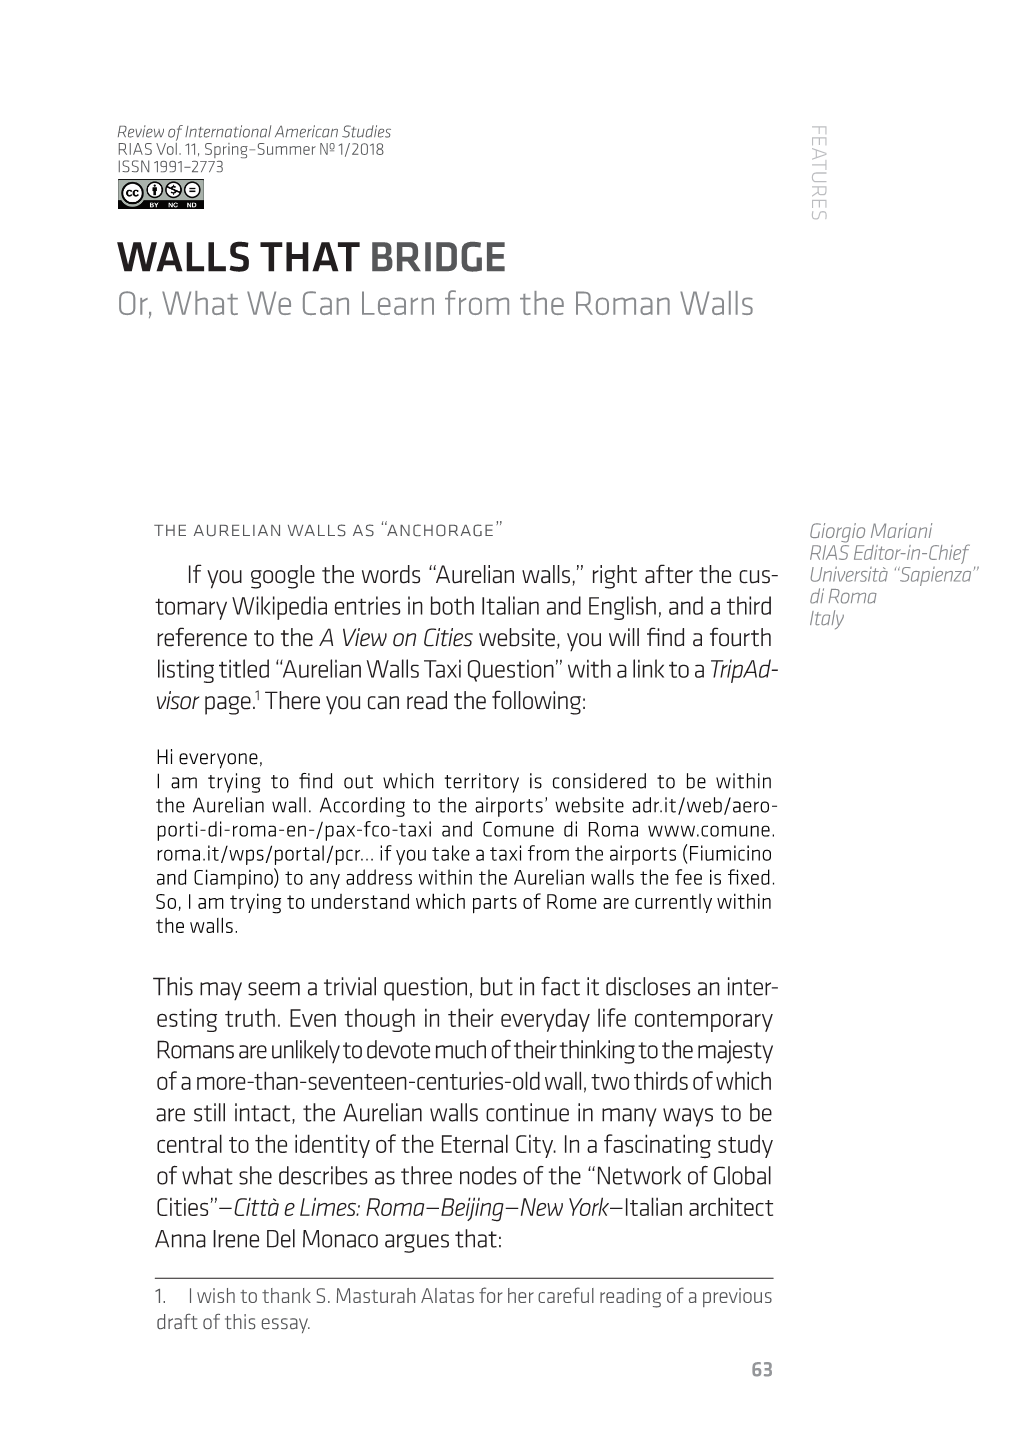 WALLS THAT BRIDGE Or, What We Can Learn from the Roman Walls